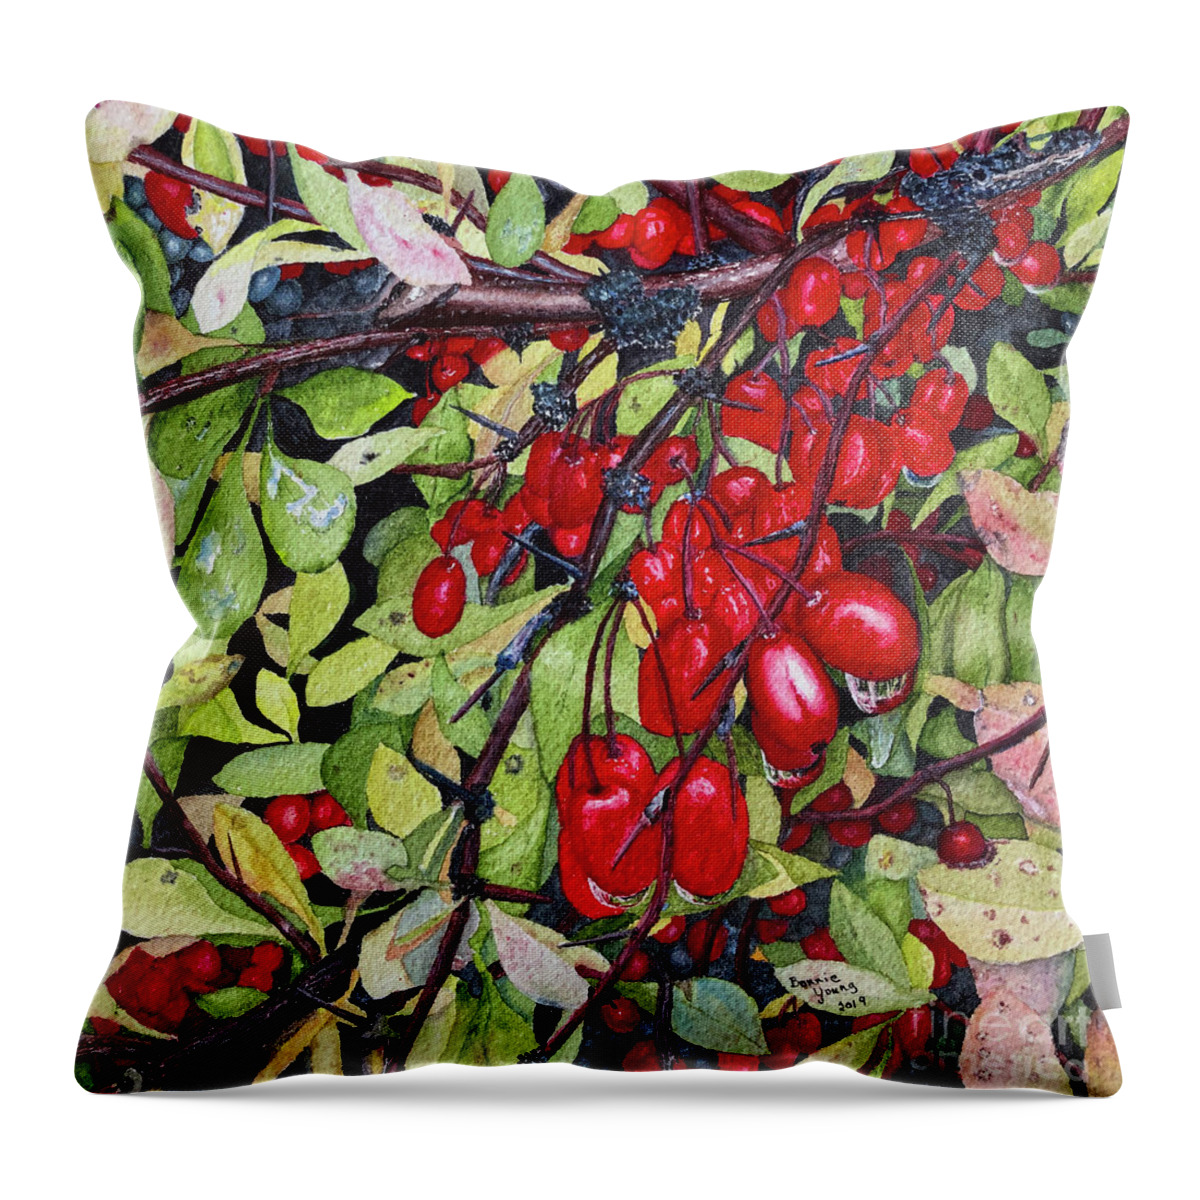 Barberries Throw Pillow featuring the painting Barberries by Bonnie Young